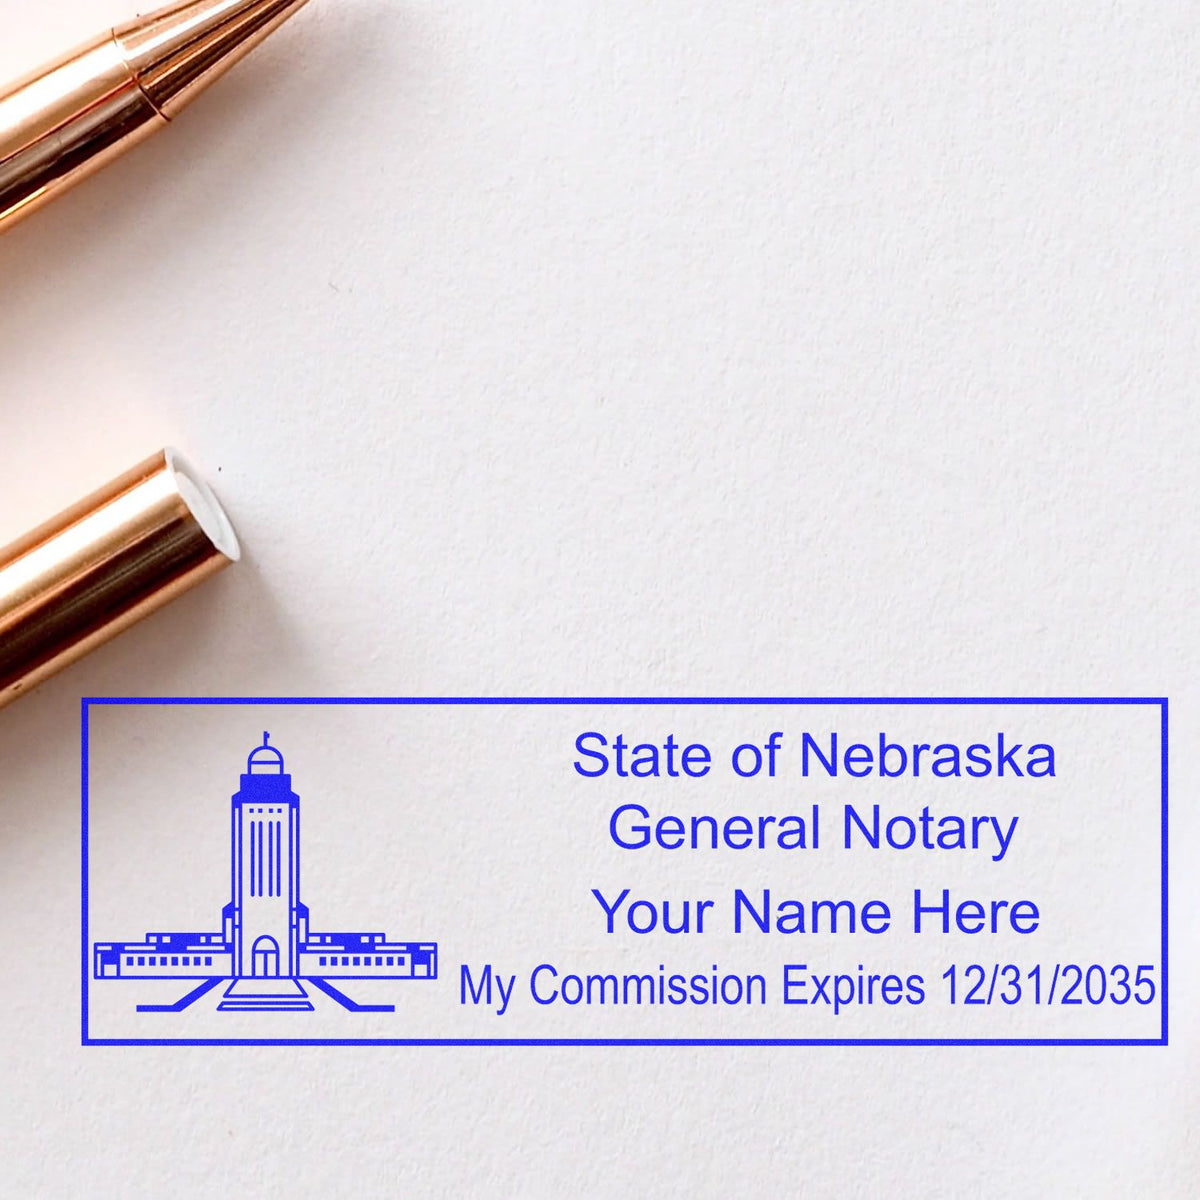 A photograph of the Heavy-Duty Nebraska Rectangular Notary Stamp stamp impression reveals a vivid, professional image of the on paper.